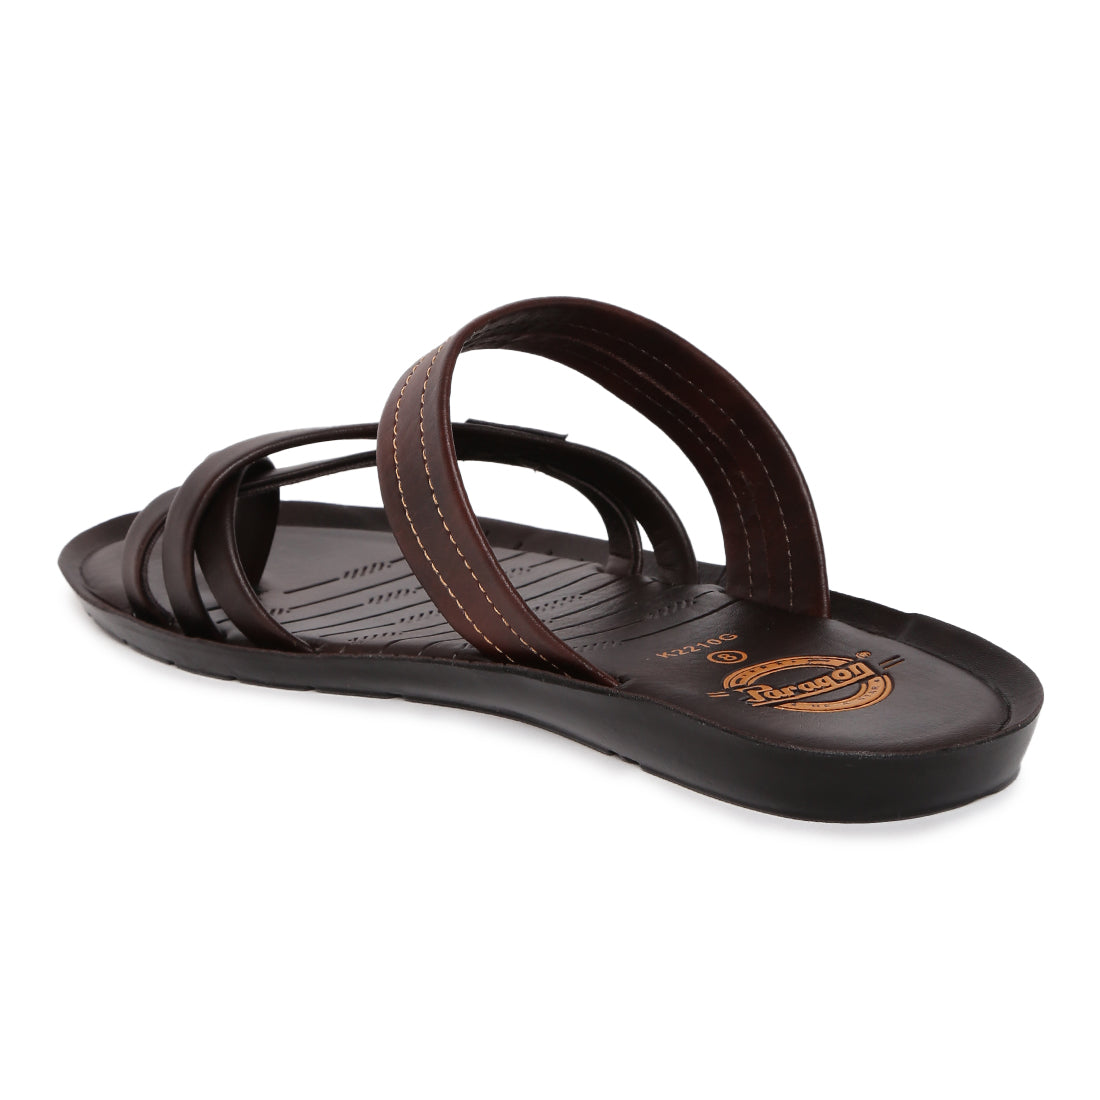 Paragon  PUK2210G Men Stylish Sandals | Comfortable Sandals for Daily Outdoor Use | Casual Formal Sandals with Cushioned Soles